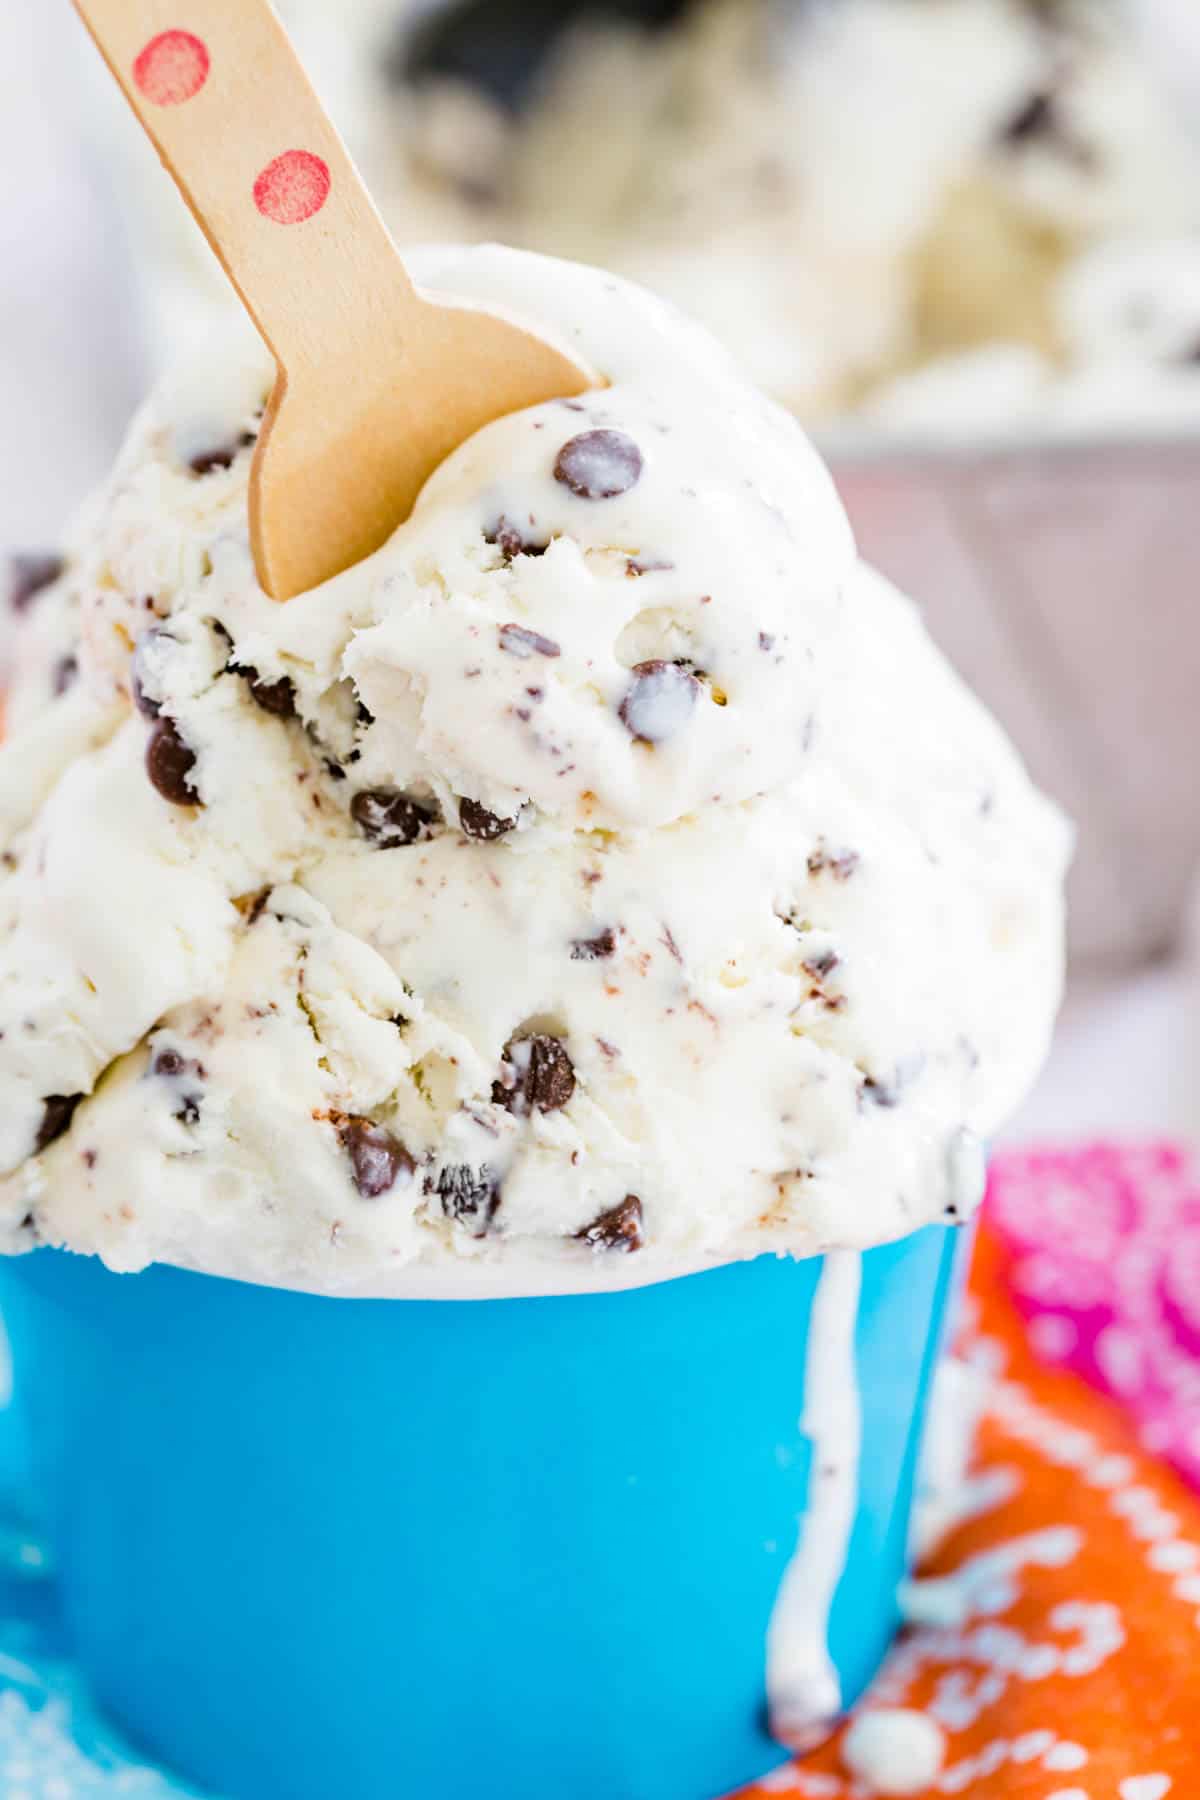 A close up shot of no churn chocolate chip ice cream in a blue cup with a spoon.